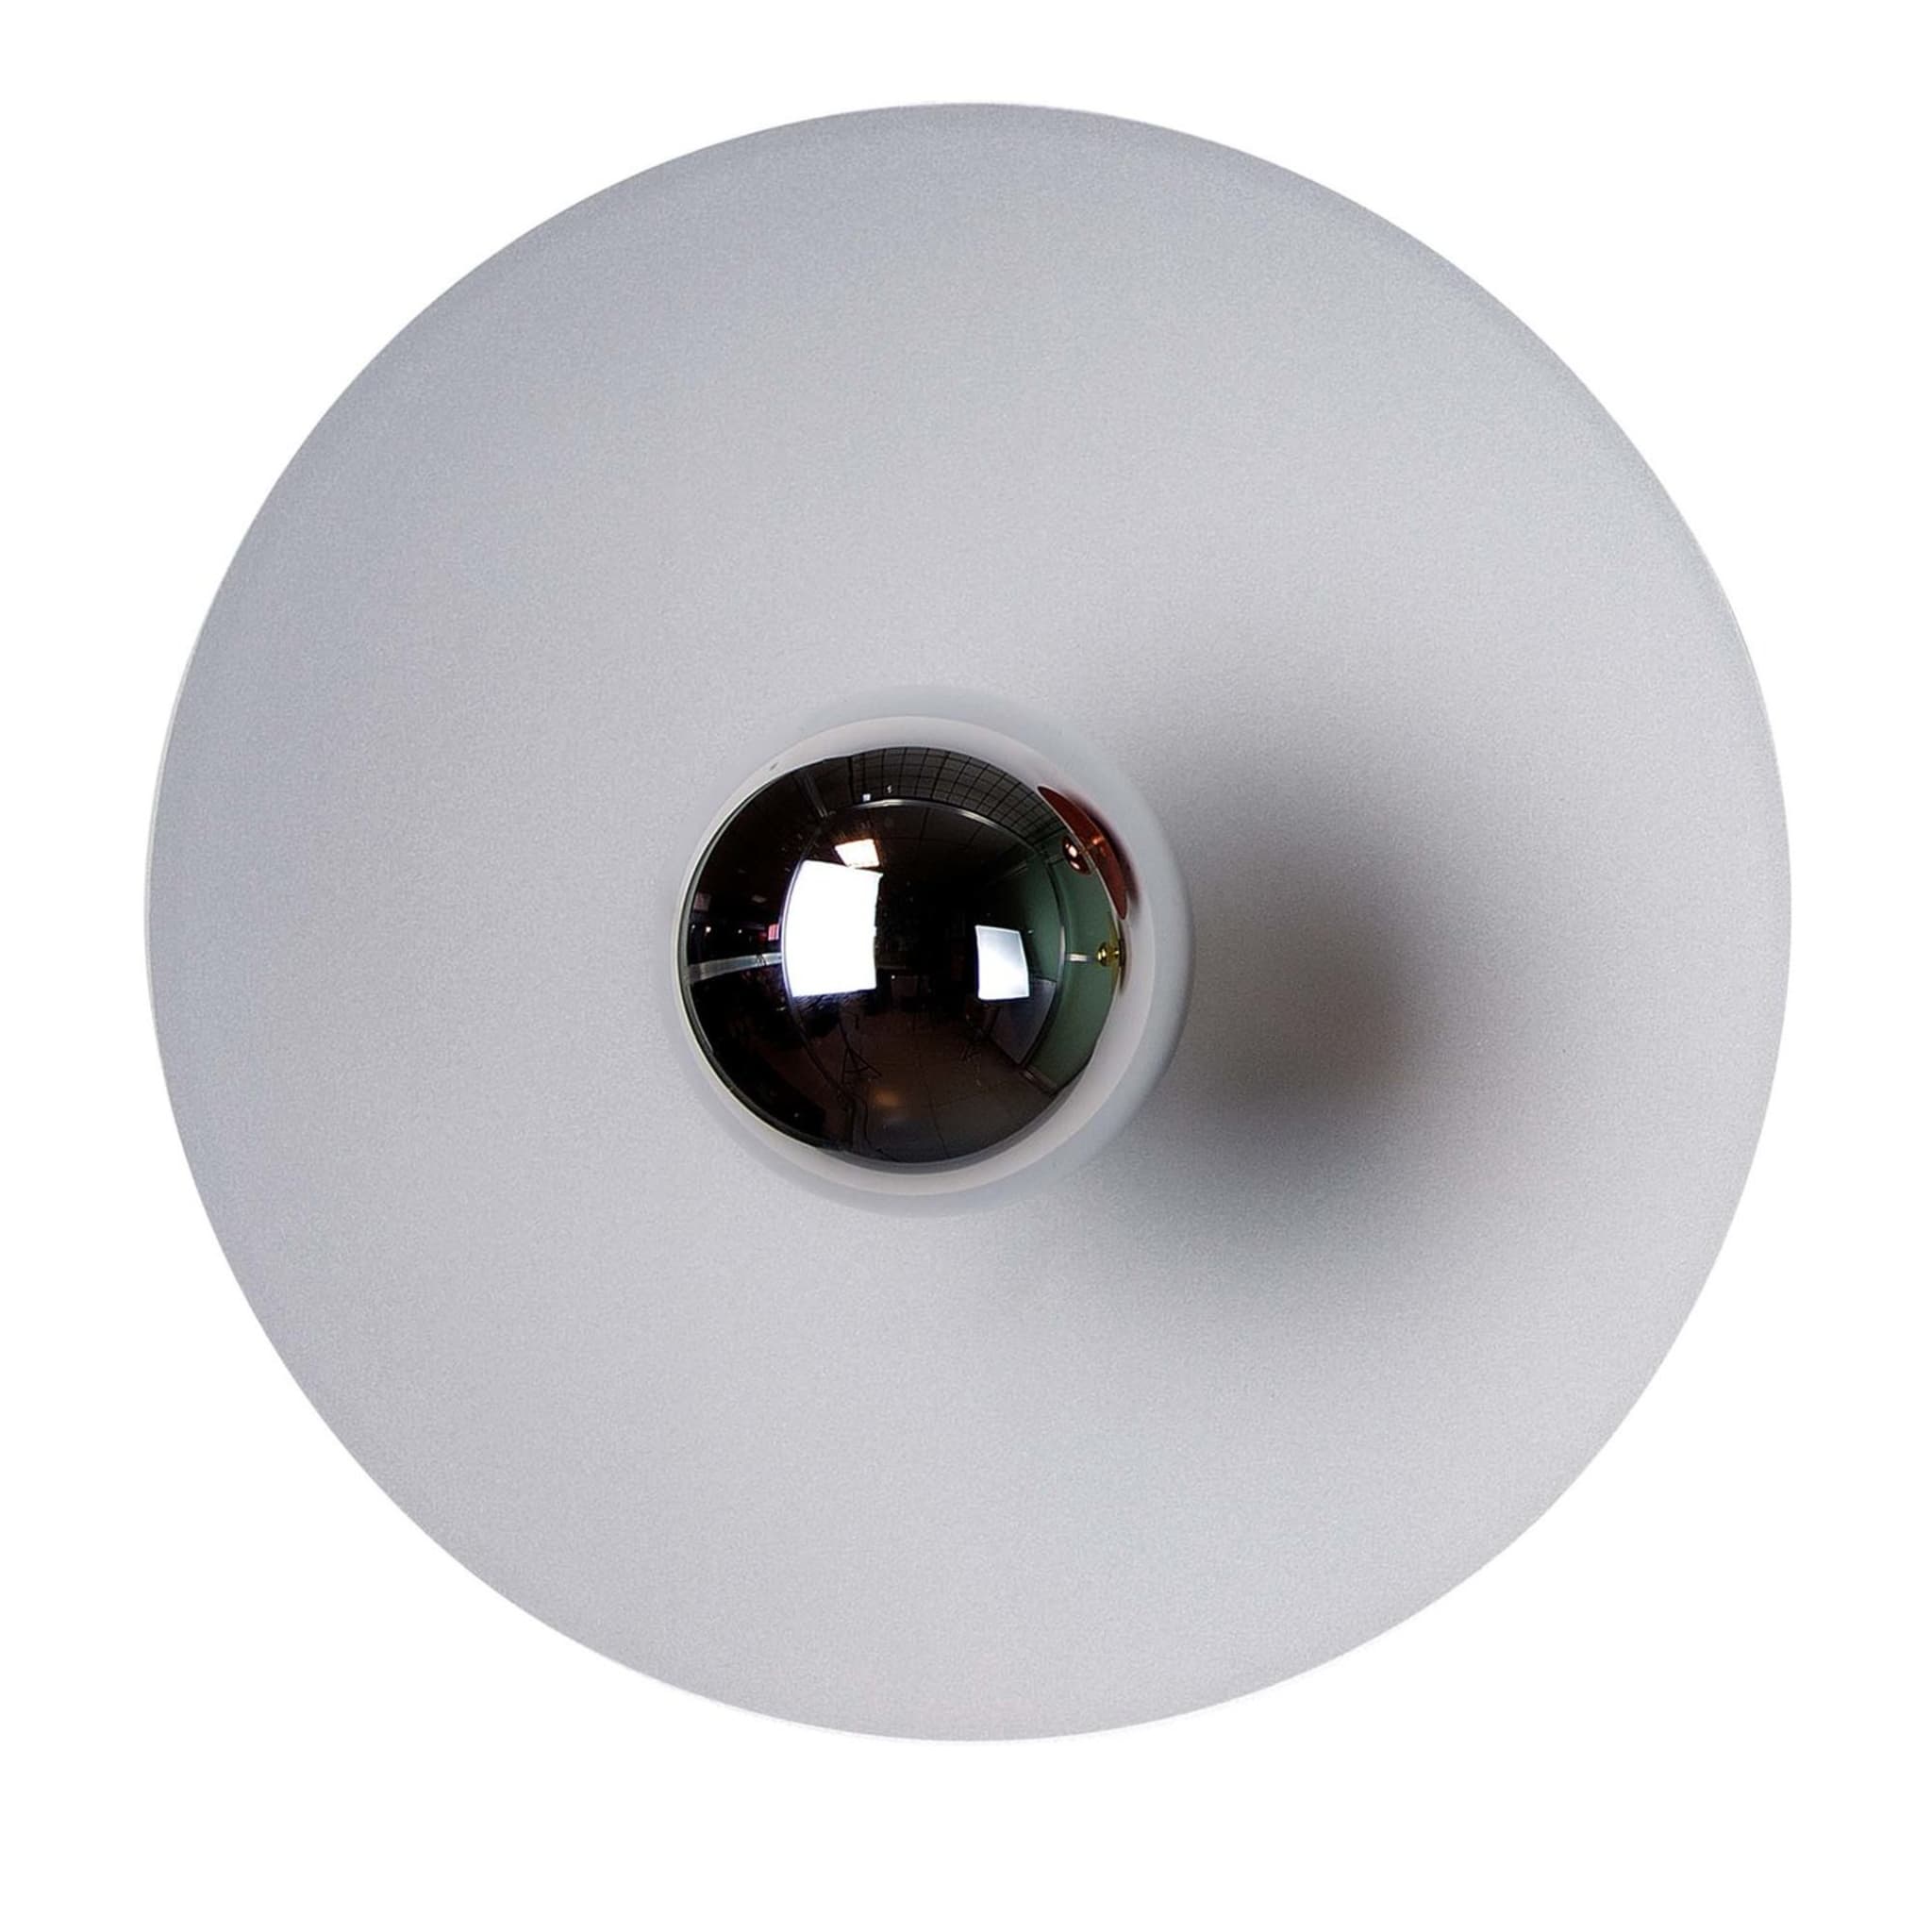 Astro pearl silver wall lamp - Main view